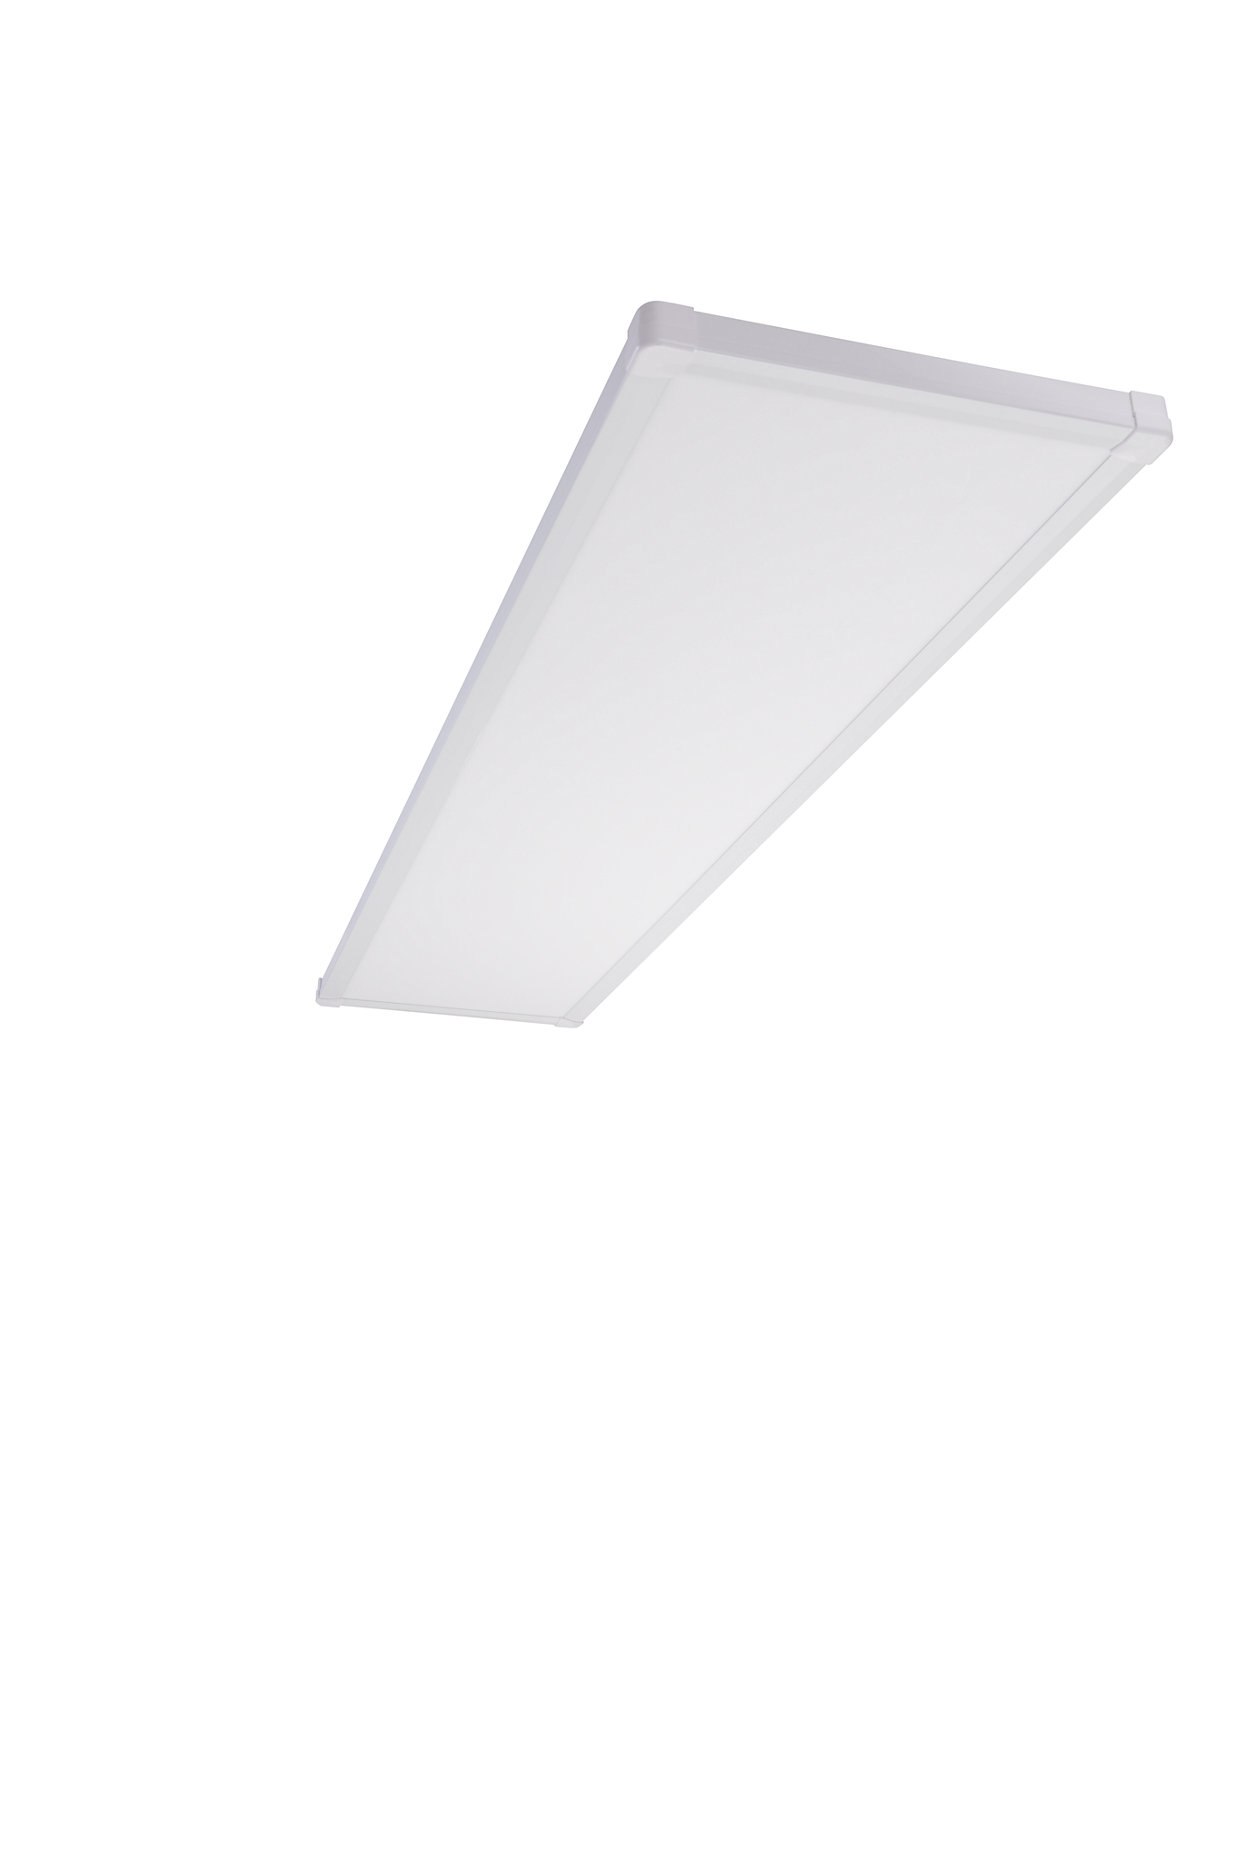 The new Smartbright slim panel offers customer excellent solution for their lighting needs. It is durable, energy efficient and comes with 3 years warranty.